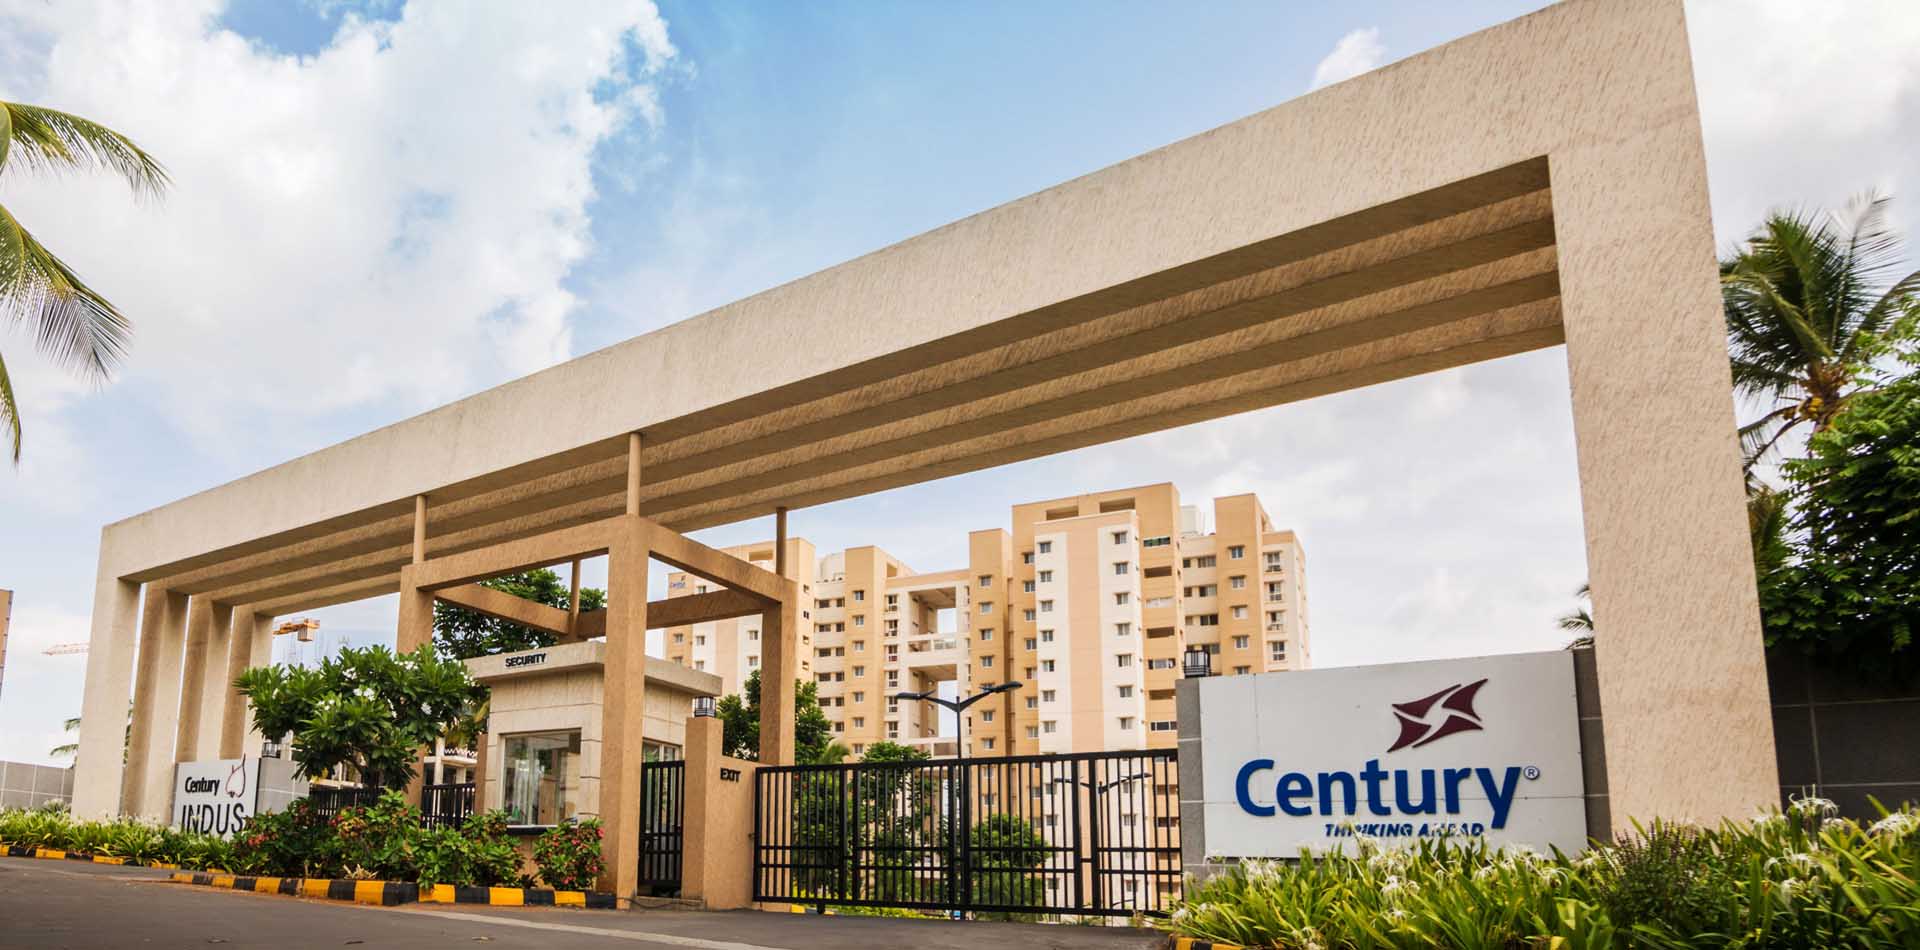 Century Indus Phase 2 is the only apartments for sale in Rajarajeshwari Nagar with 80% open space